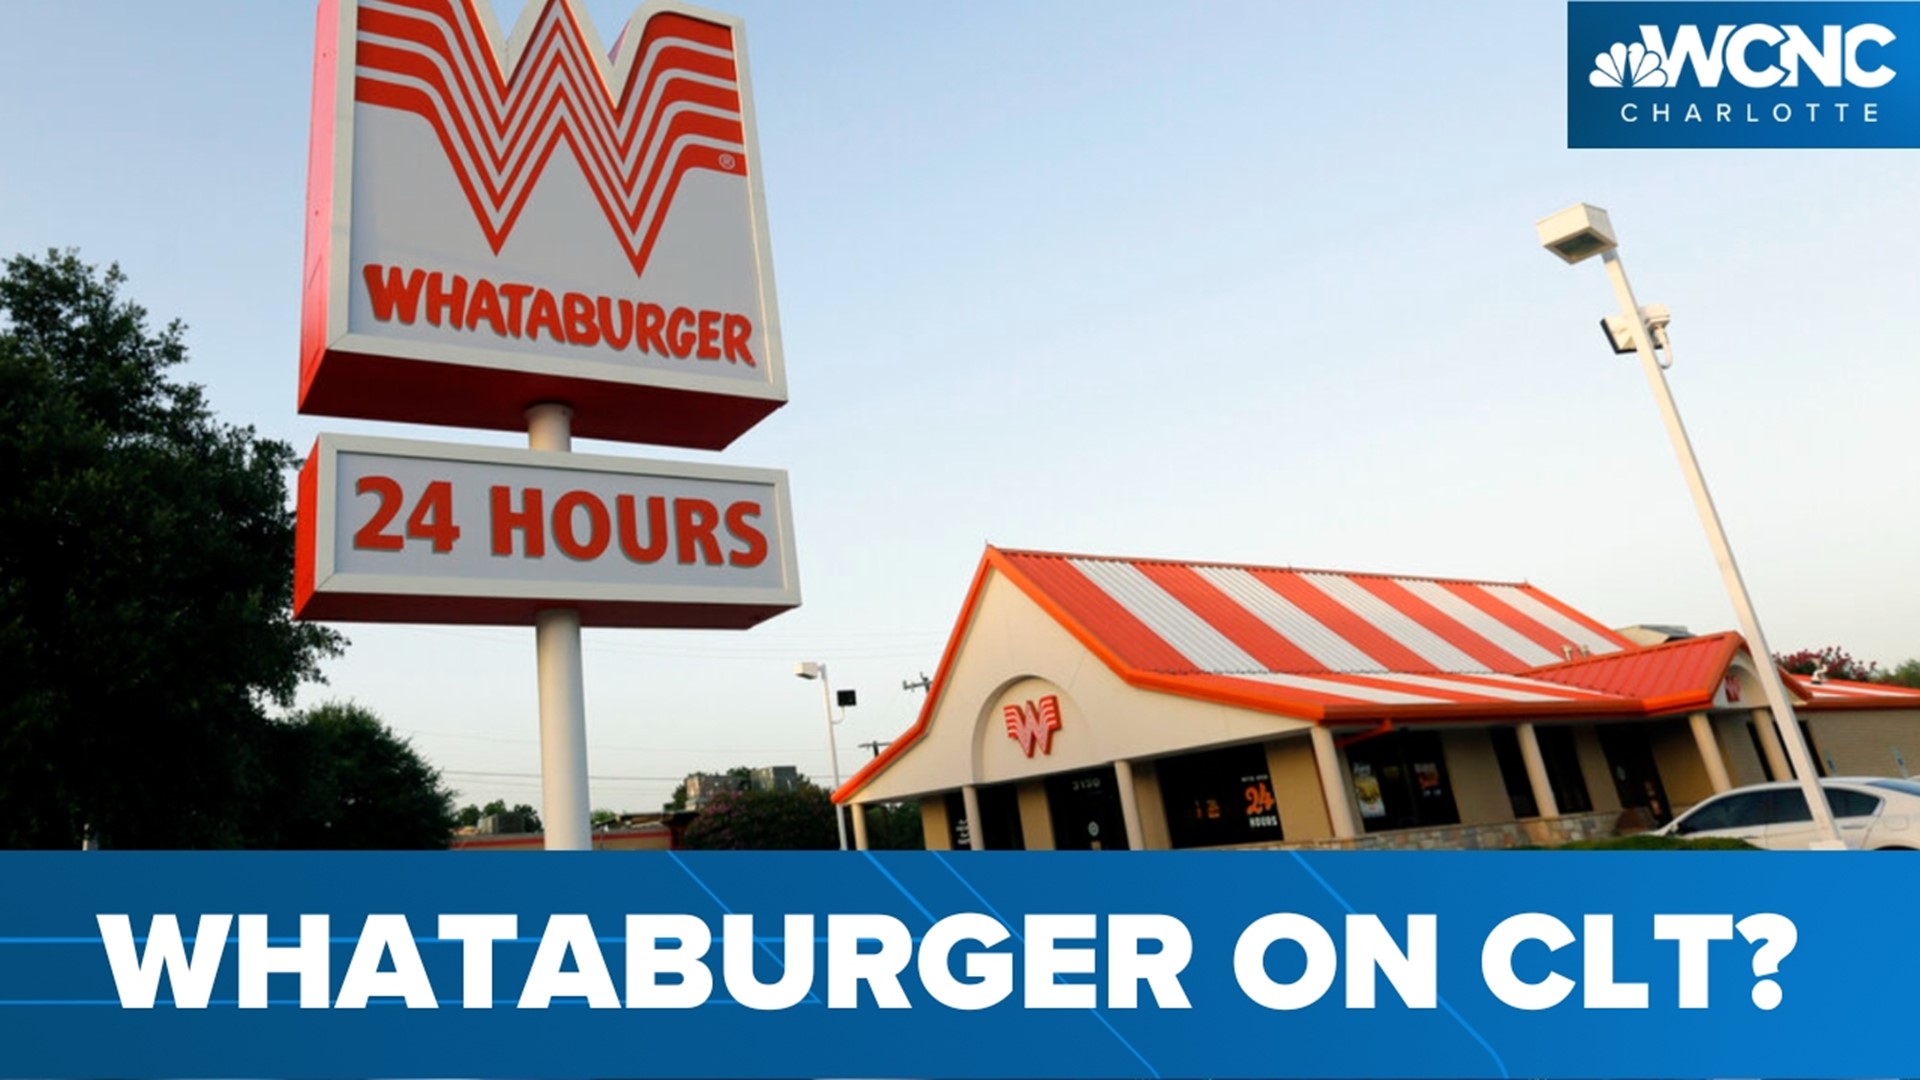 A popular Texas-based hamburger chain appears to have filed plans to open its first location in Charlotte.